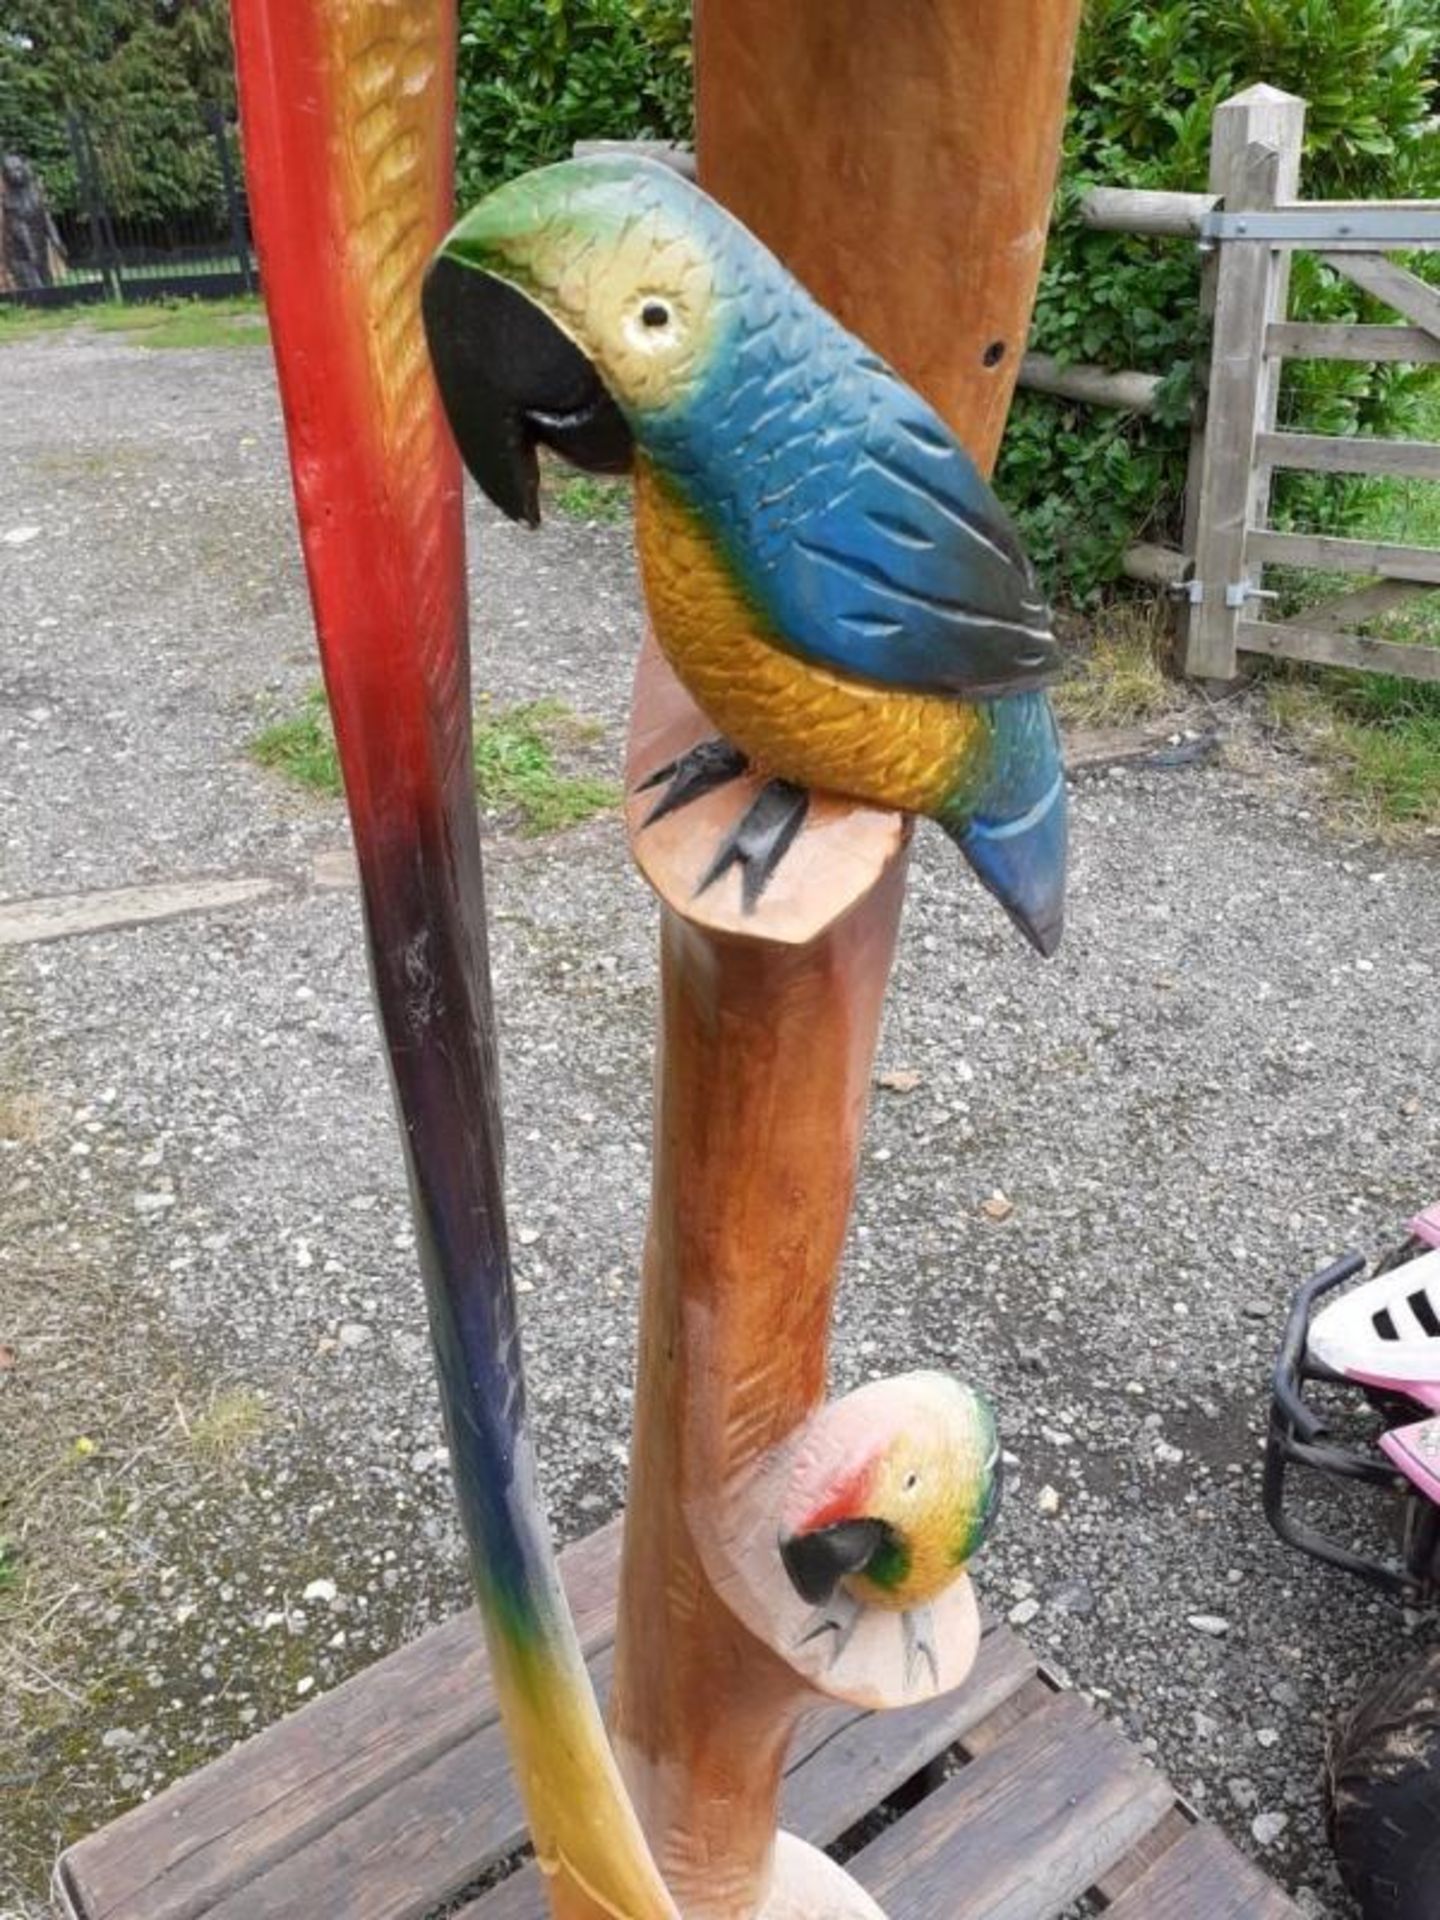 1 x 1.7-Metre Tall Wooden Sculpture Featuring 3 Colourful Parrots - Dimensions: Height 170cm x - Image 5 of 9